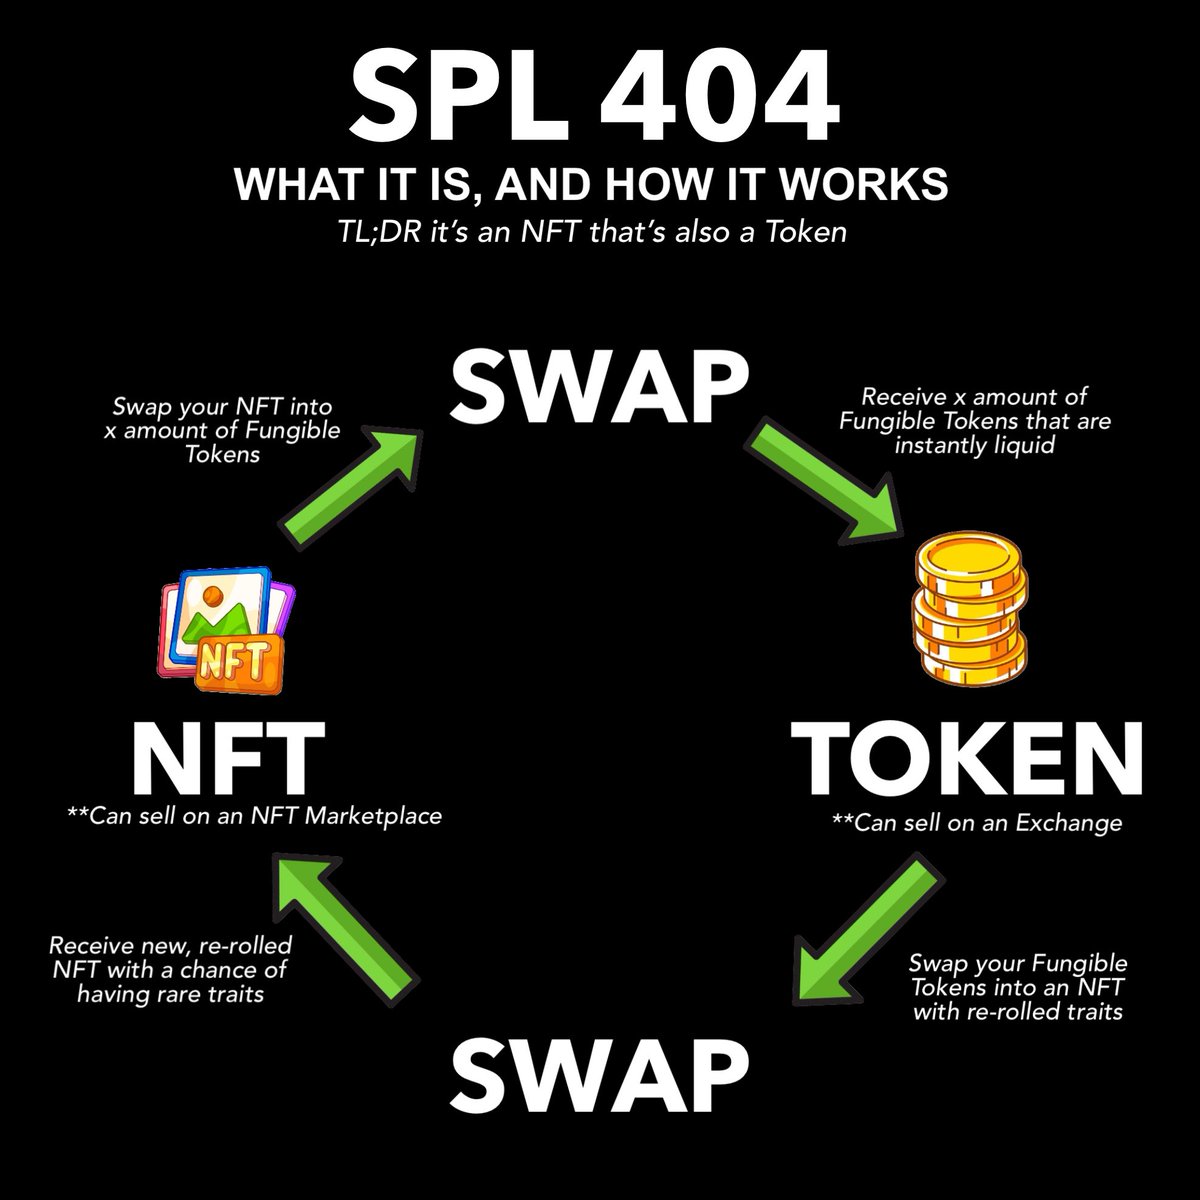 What is an SPL404 and why should you care about Hybrid DeFi? 𝗧𝗟;𝗗𝗥 𝗶𝘁’𝘀 𝗮𝗻 𝗡𝗙𝗧 𝘁𝗵𝗮𝘁’𝘀 𝗮𝗹𝘀𝗼 𝗮 𝗧𝗼𝗸𝗲𝗻 An SPL404 is a non-fungible token that’s minted via Solana’s Token22 standard and has properties that allow a creator to set an intrinsic token value to…